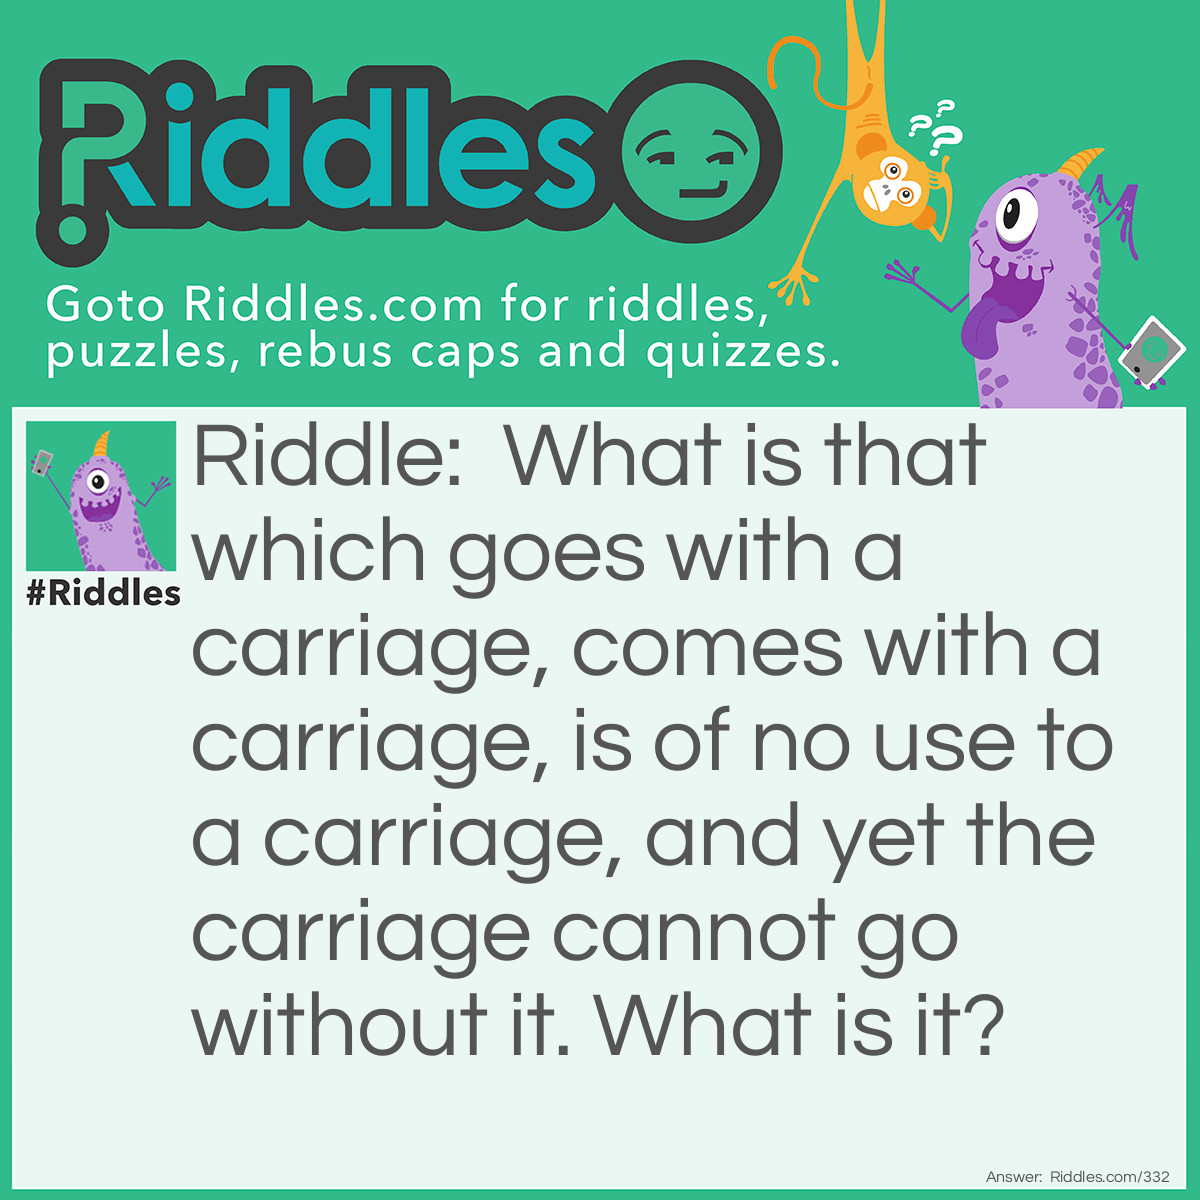 Riddle: What is that which goes with a carriage, comes with a carriage, is of no use to a carriage, and yet the carriage cannot go without it. What is it? Answer: Noise.